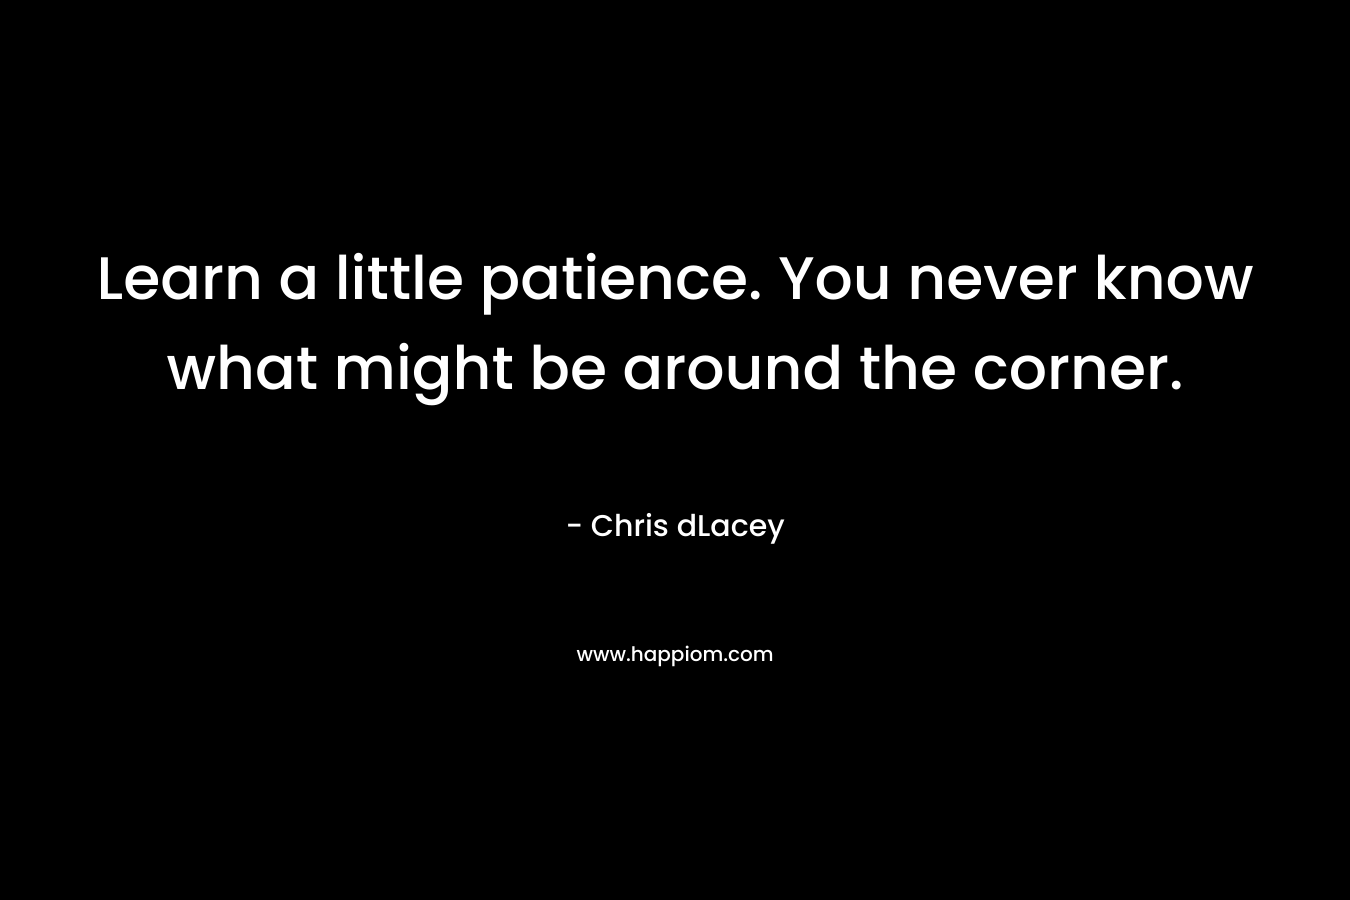 Learn a little patience. You never know what might be around the corner. – Chris dLacey